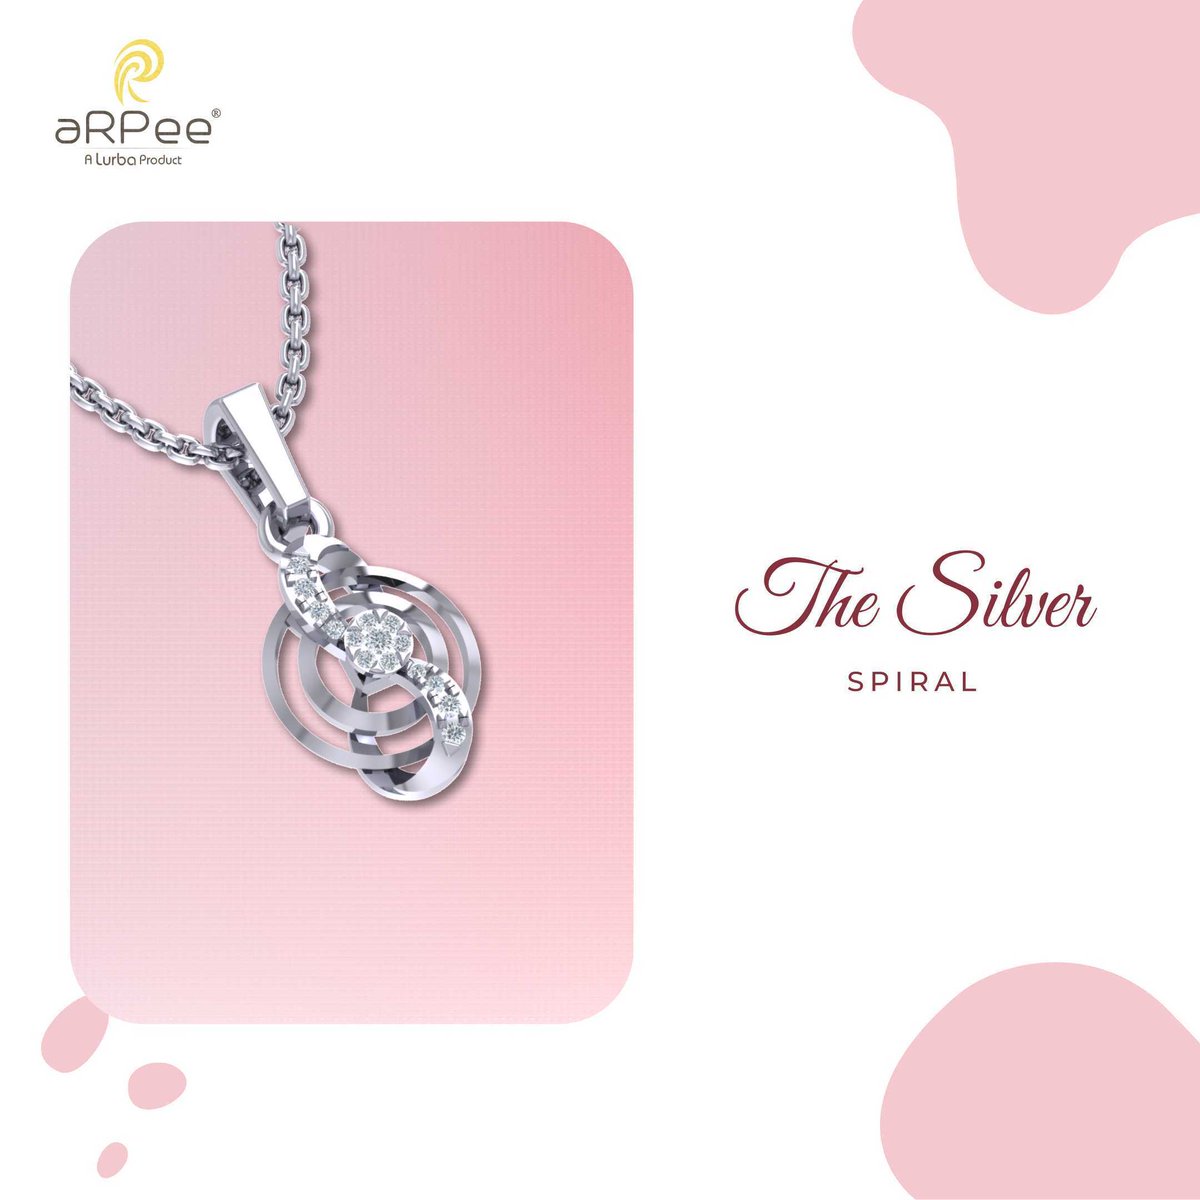 White diamonds with a unique spiral-like design, coated in white metal is the perfect piece for an evening look. 
.
.
.
.
.
.
.
.
.
.
.
#arpeejewellery #silver #silverpendant #diamonds #comfortzone #pendants #diamondpendant #pendantset #rare #diamondjewellery #bracele #diamondjew